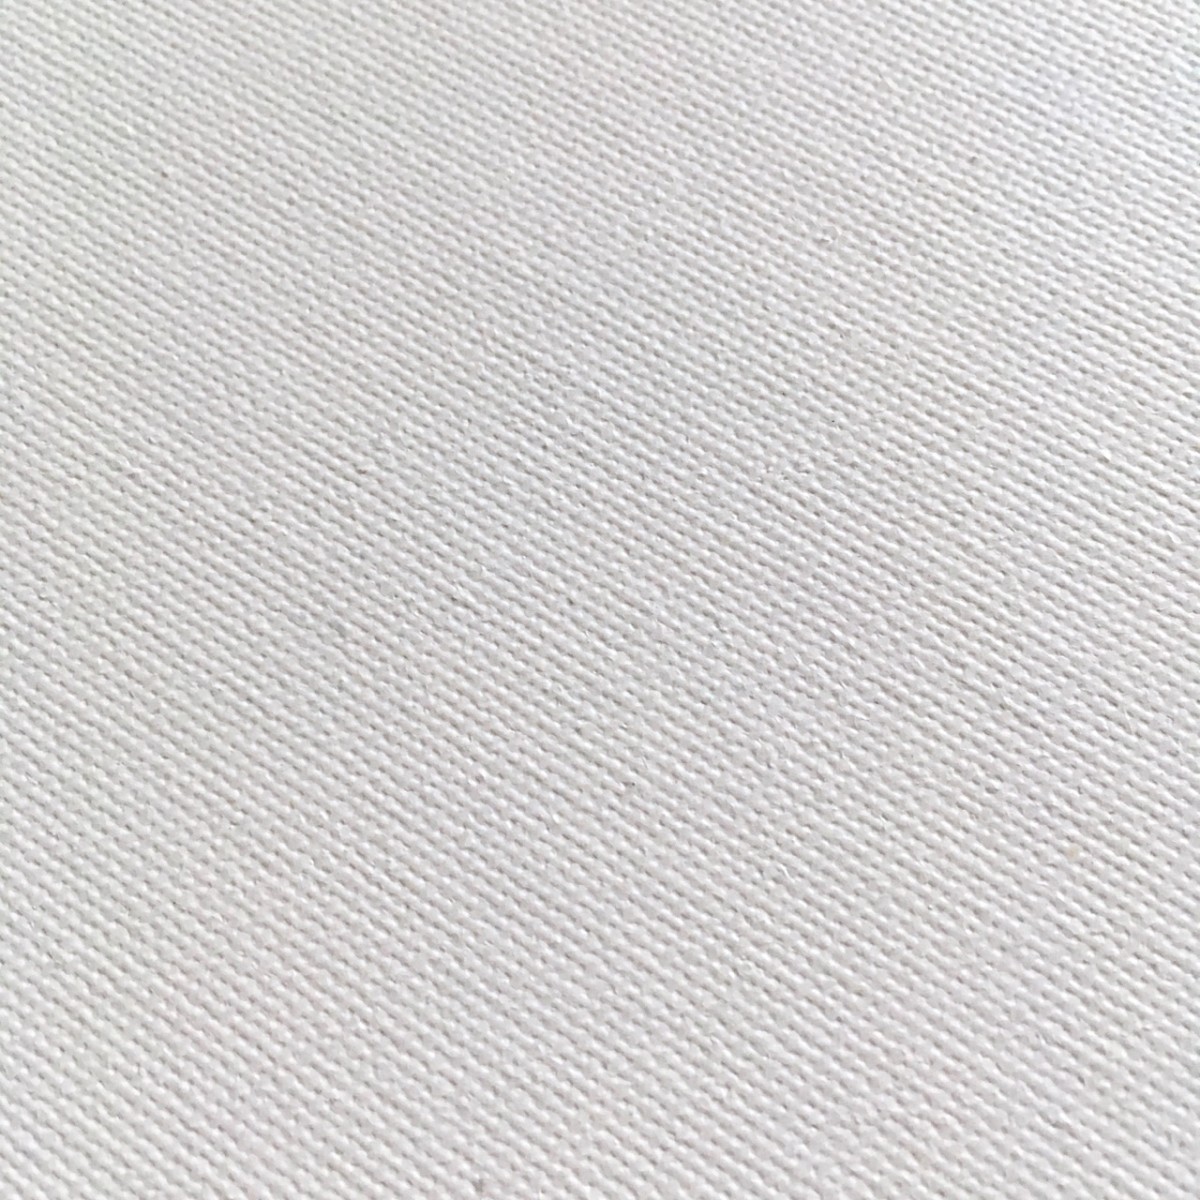 A close-up showing the texture of canvas pad sheet